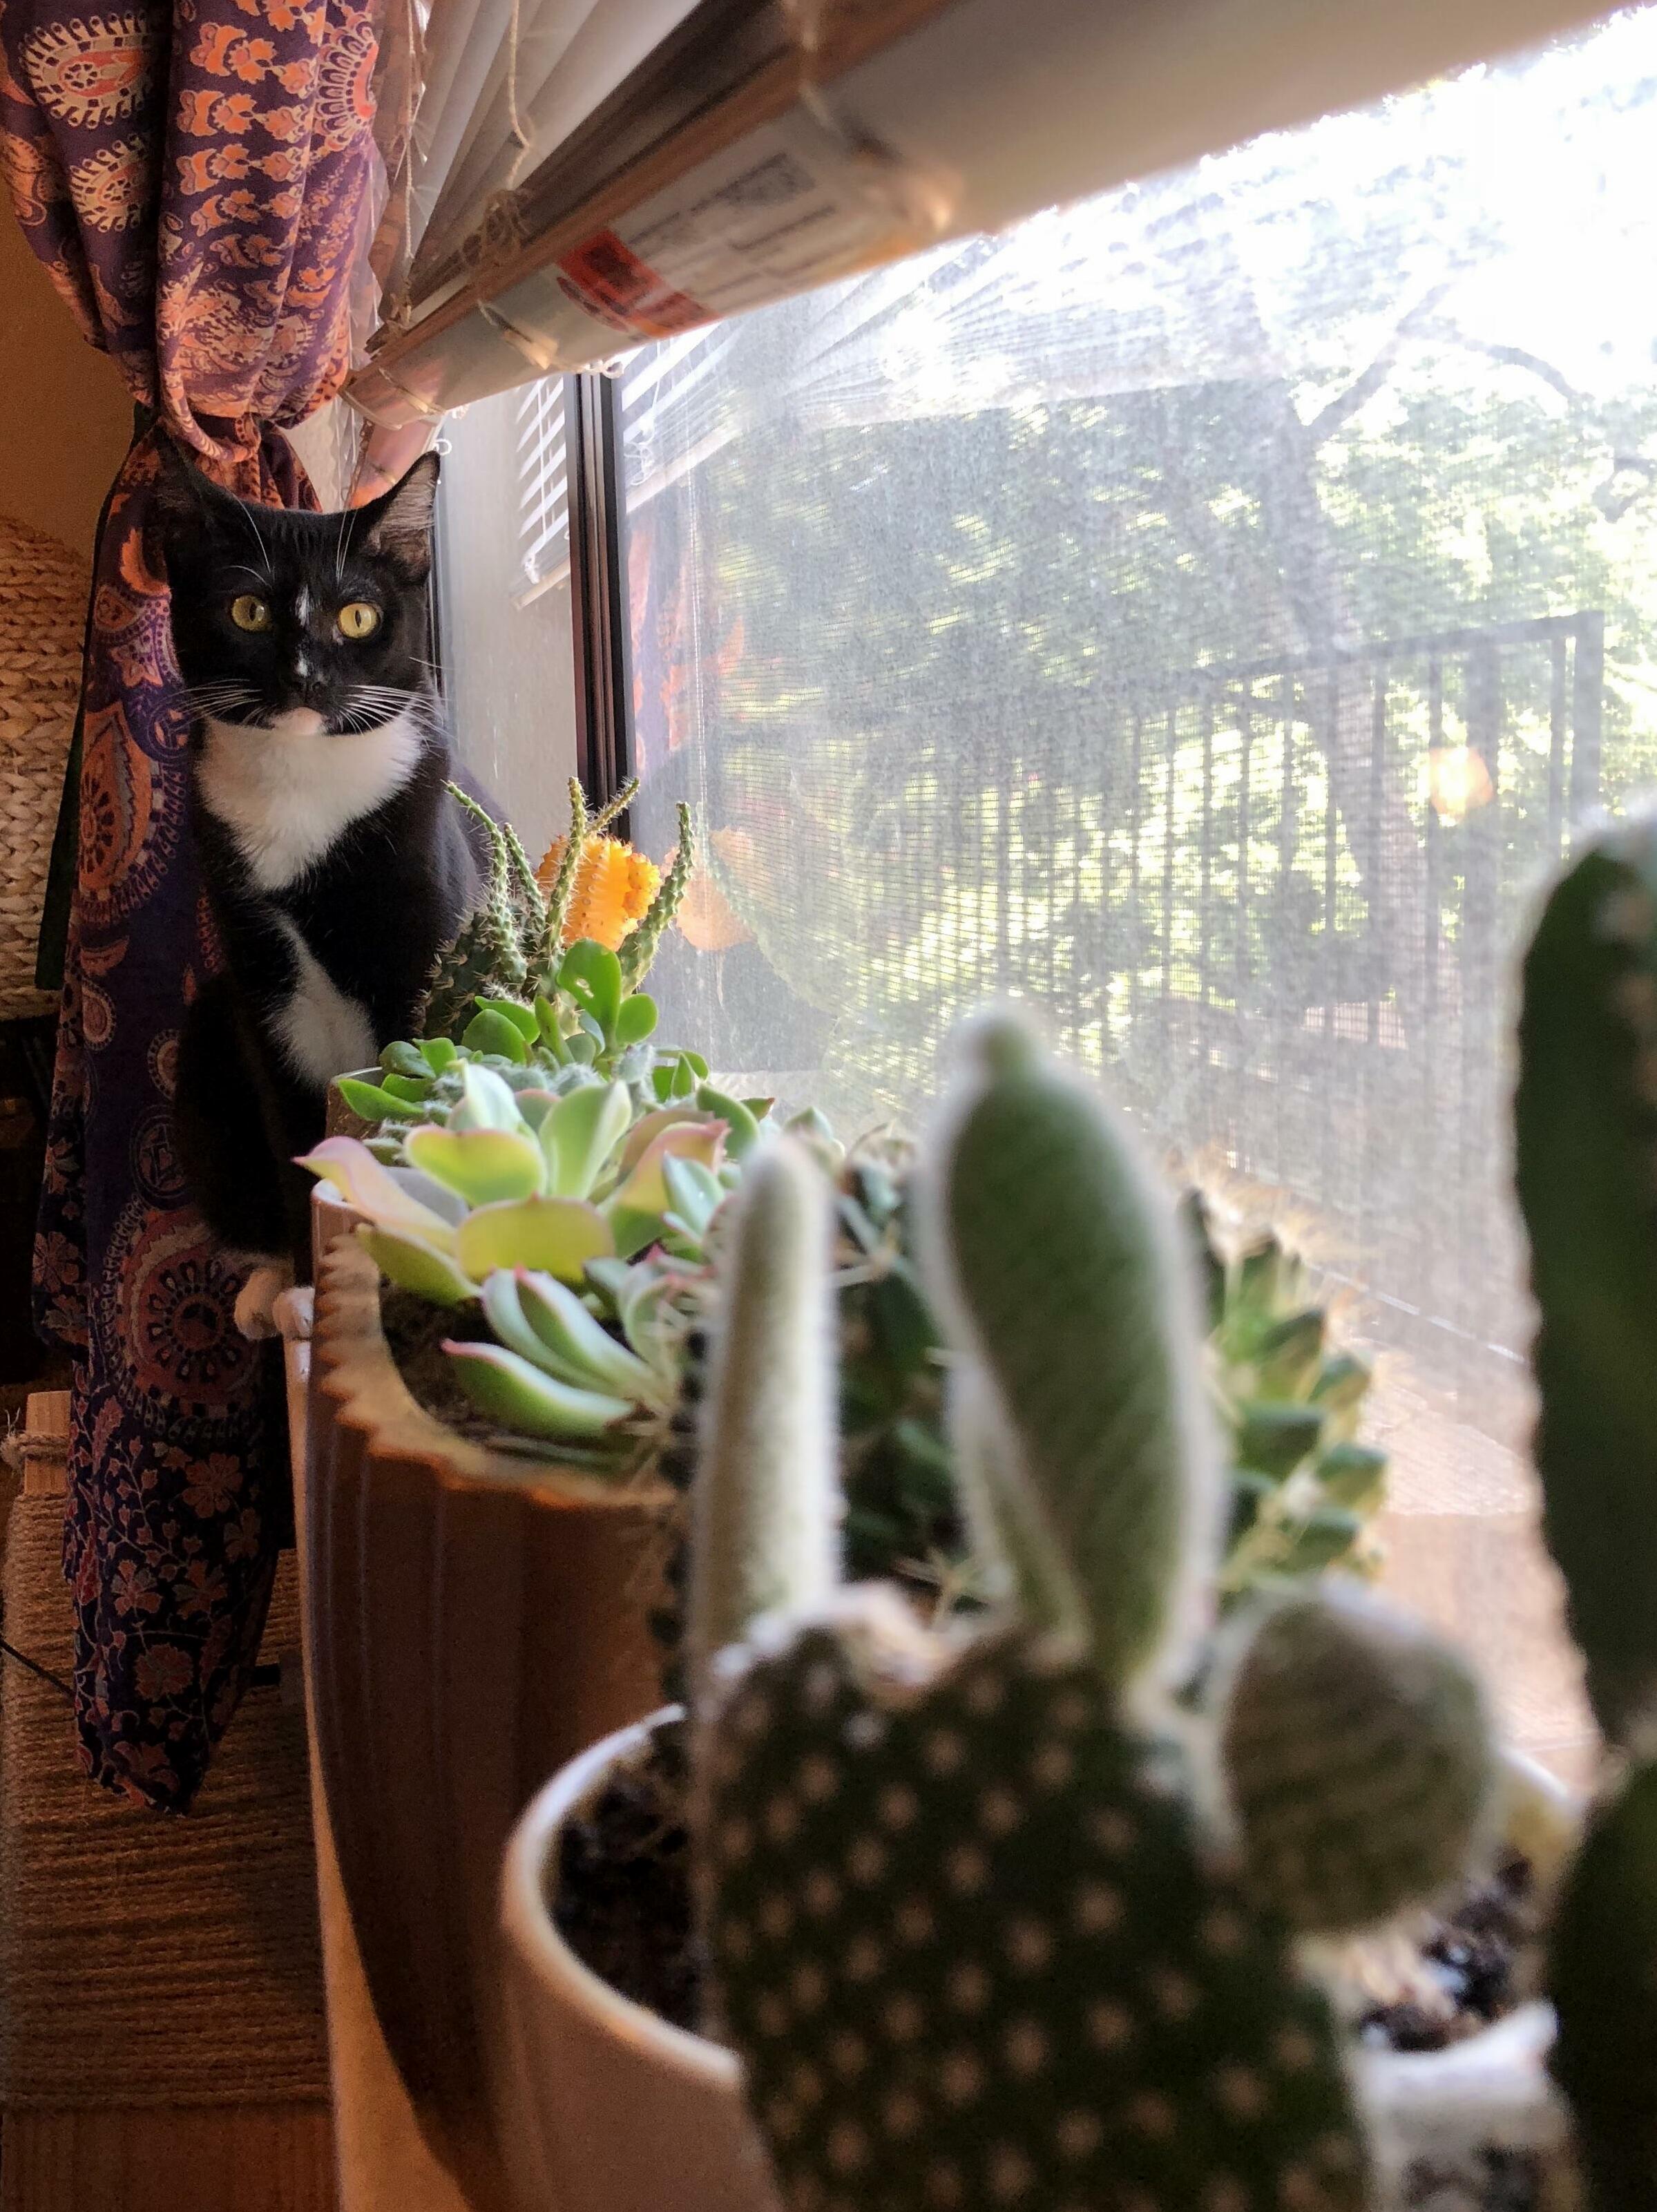 Her face every time a new plant is added to her windowsill